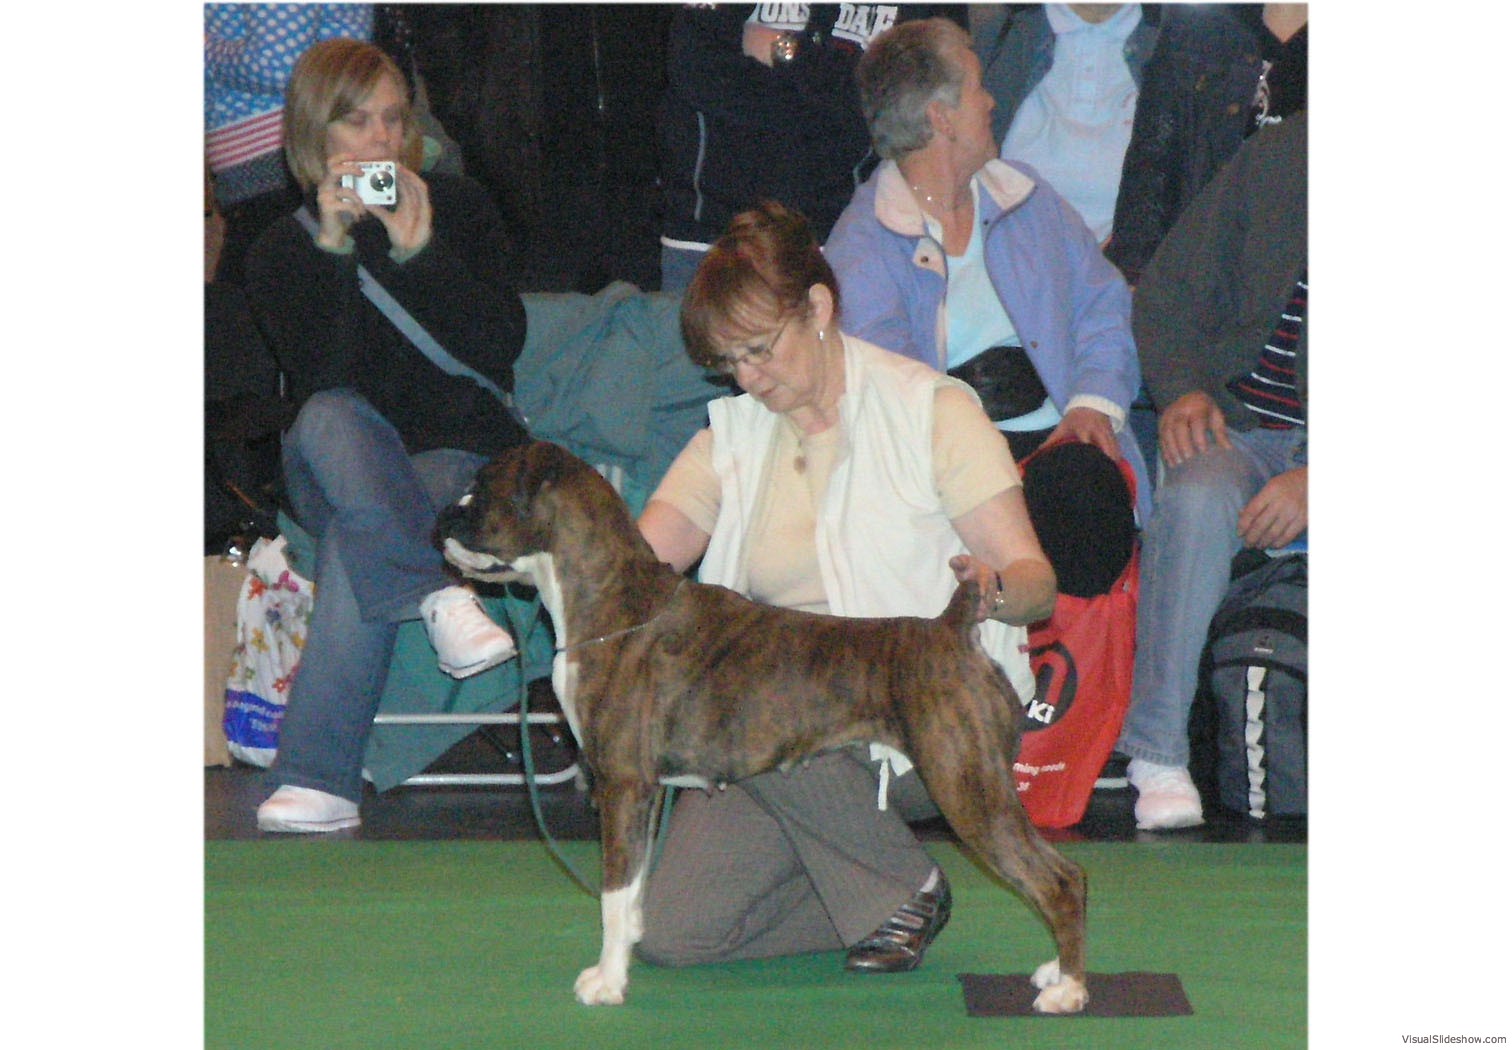 Shortlisted for the CC at Crufts